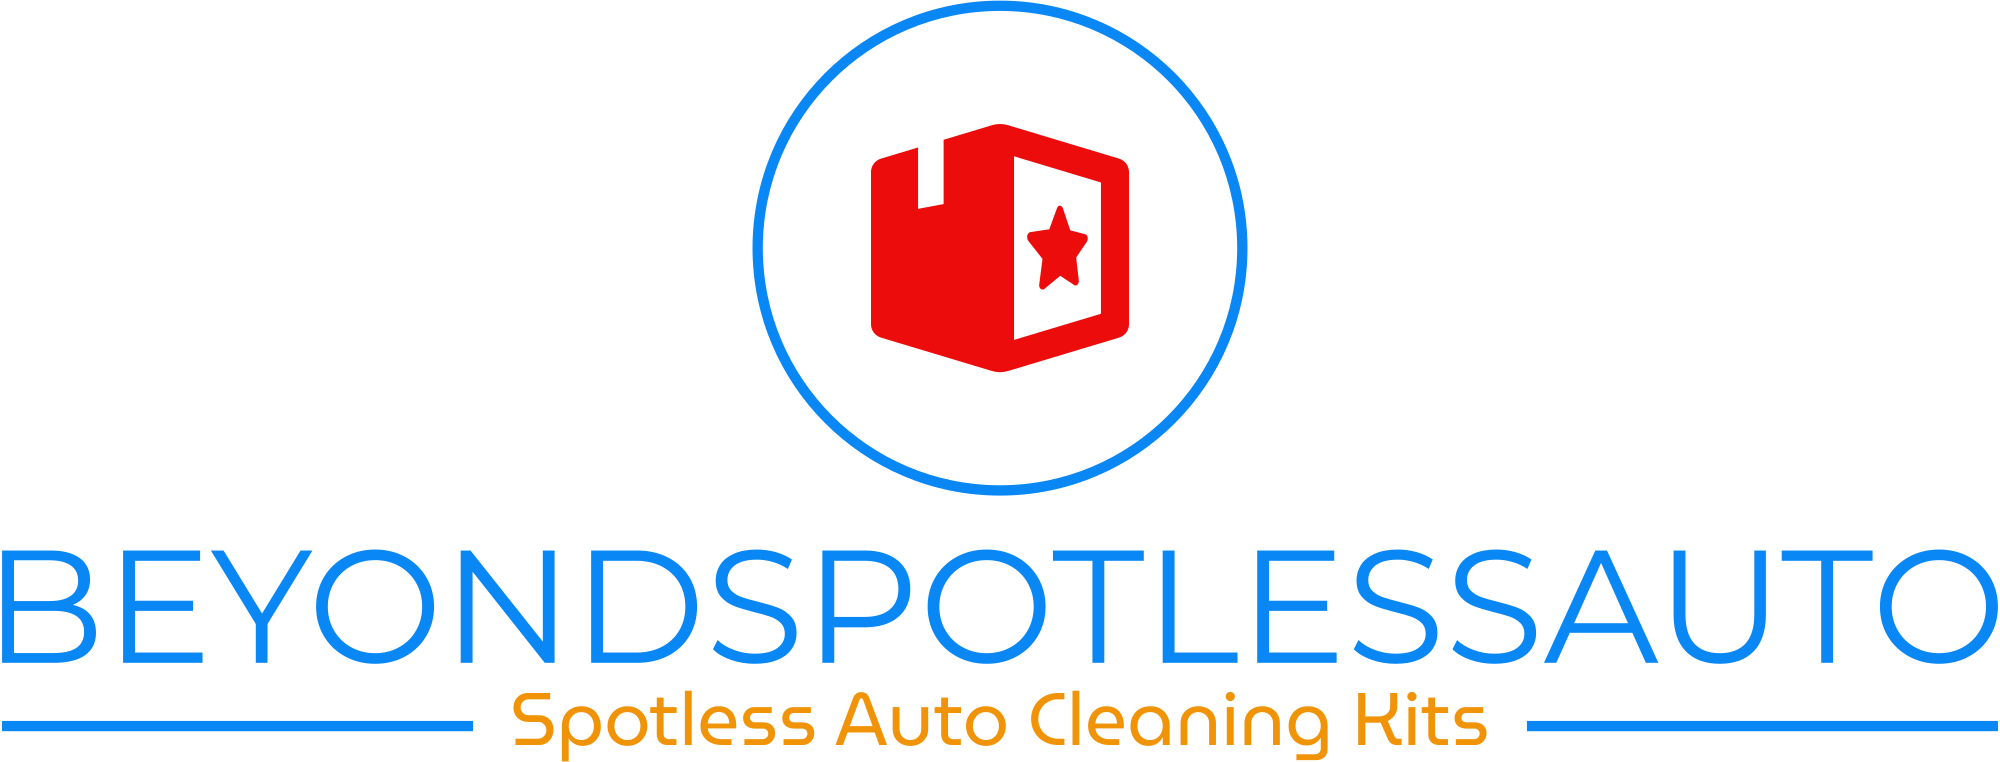 Compare Car Detailing Kits , Car Cleaning Kit, Detailing kits from reputable brands, BeyondSpotlessAuto.Com